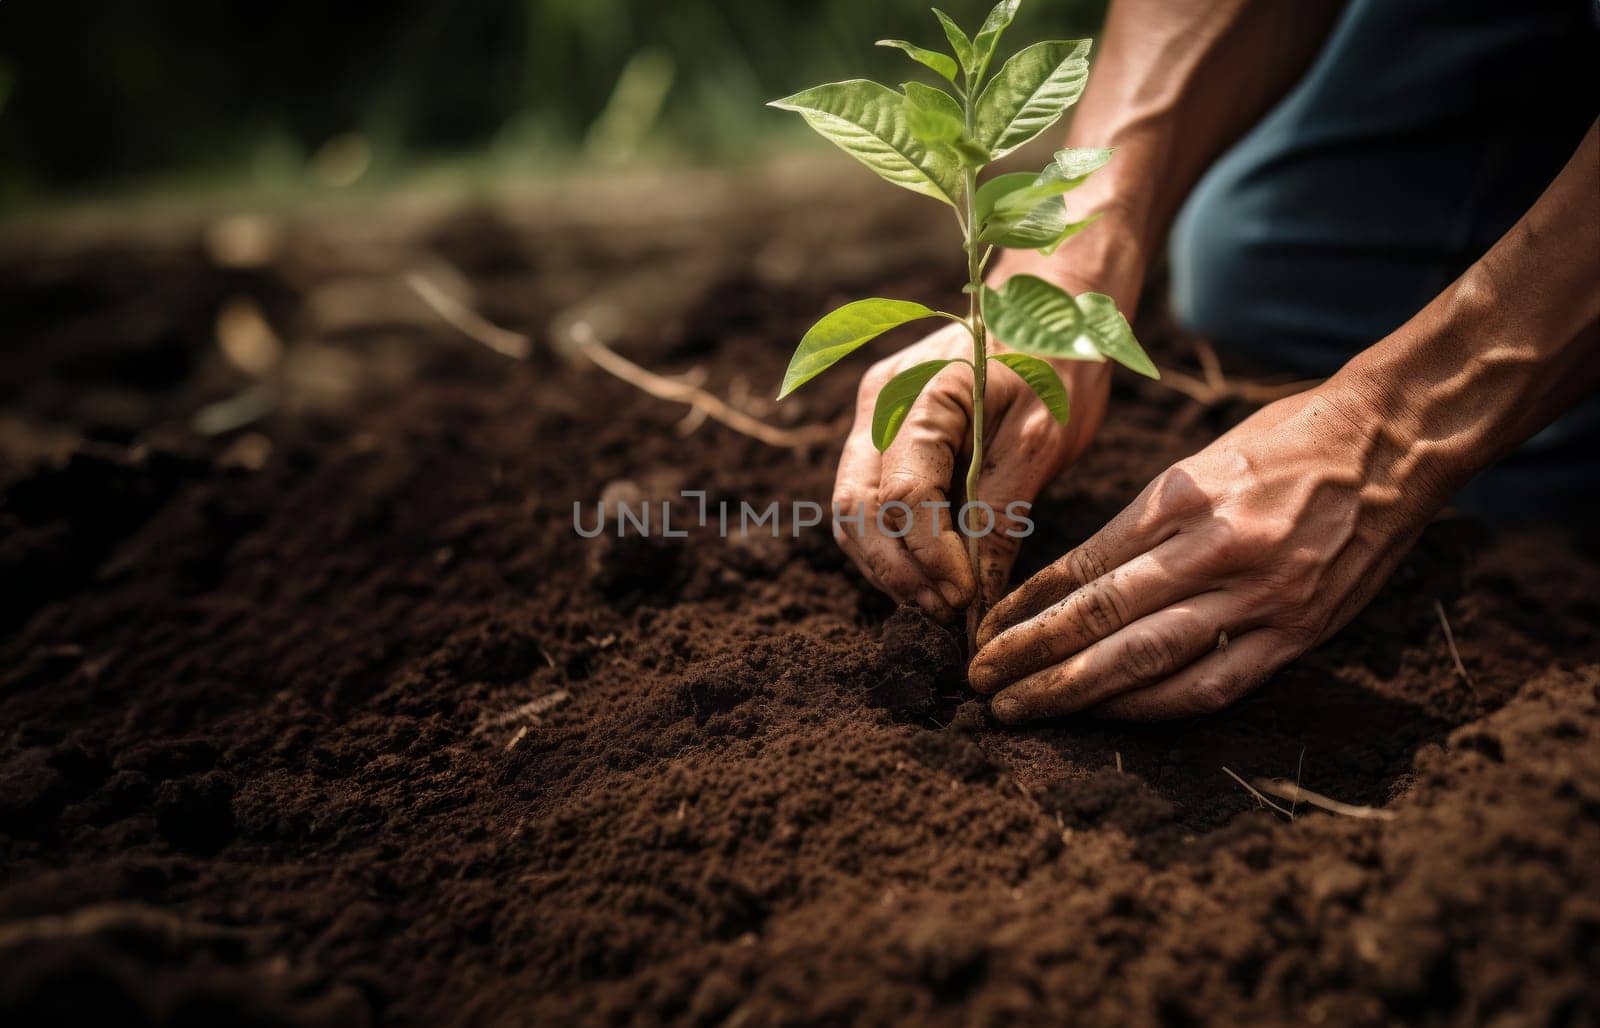 hands from a close-knit community come together to plant a young sapling, symbolizing collective growth, environmental stewardship, and the nurturing bond between people and nature.Generated image.